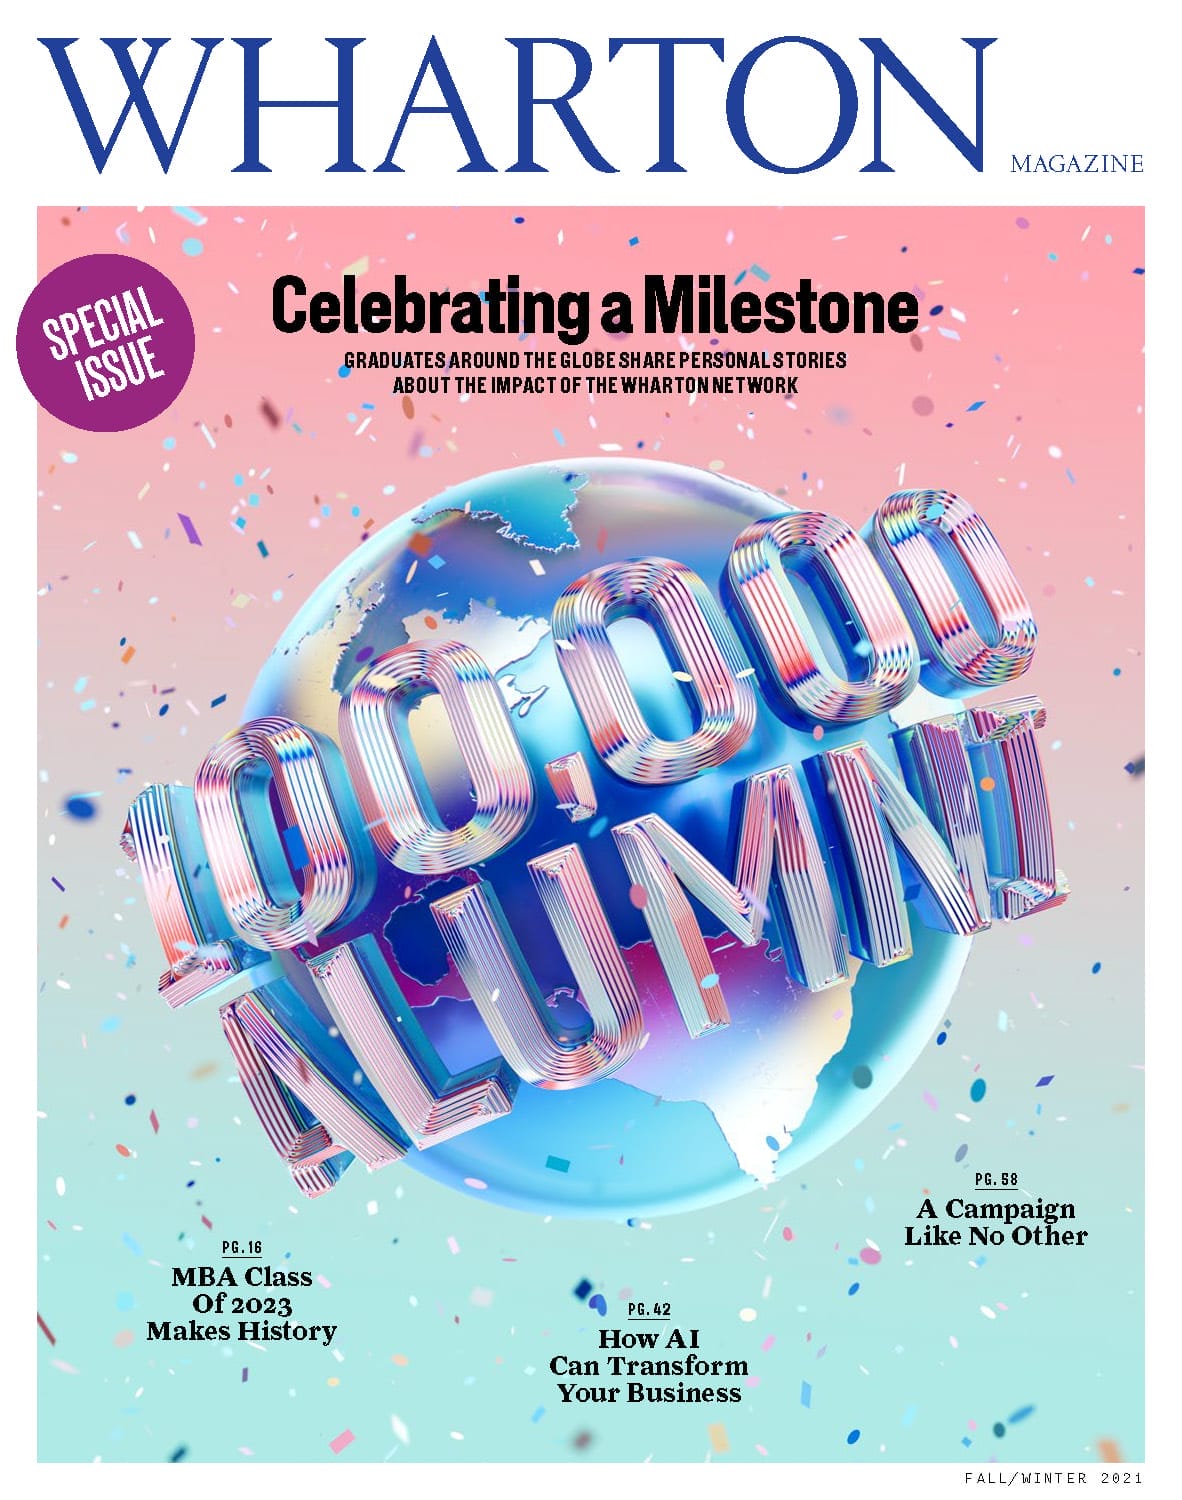 Cover photo for the new issue of Wharton Magazine, featuring a globe with the words 